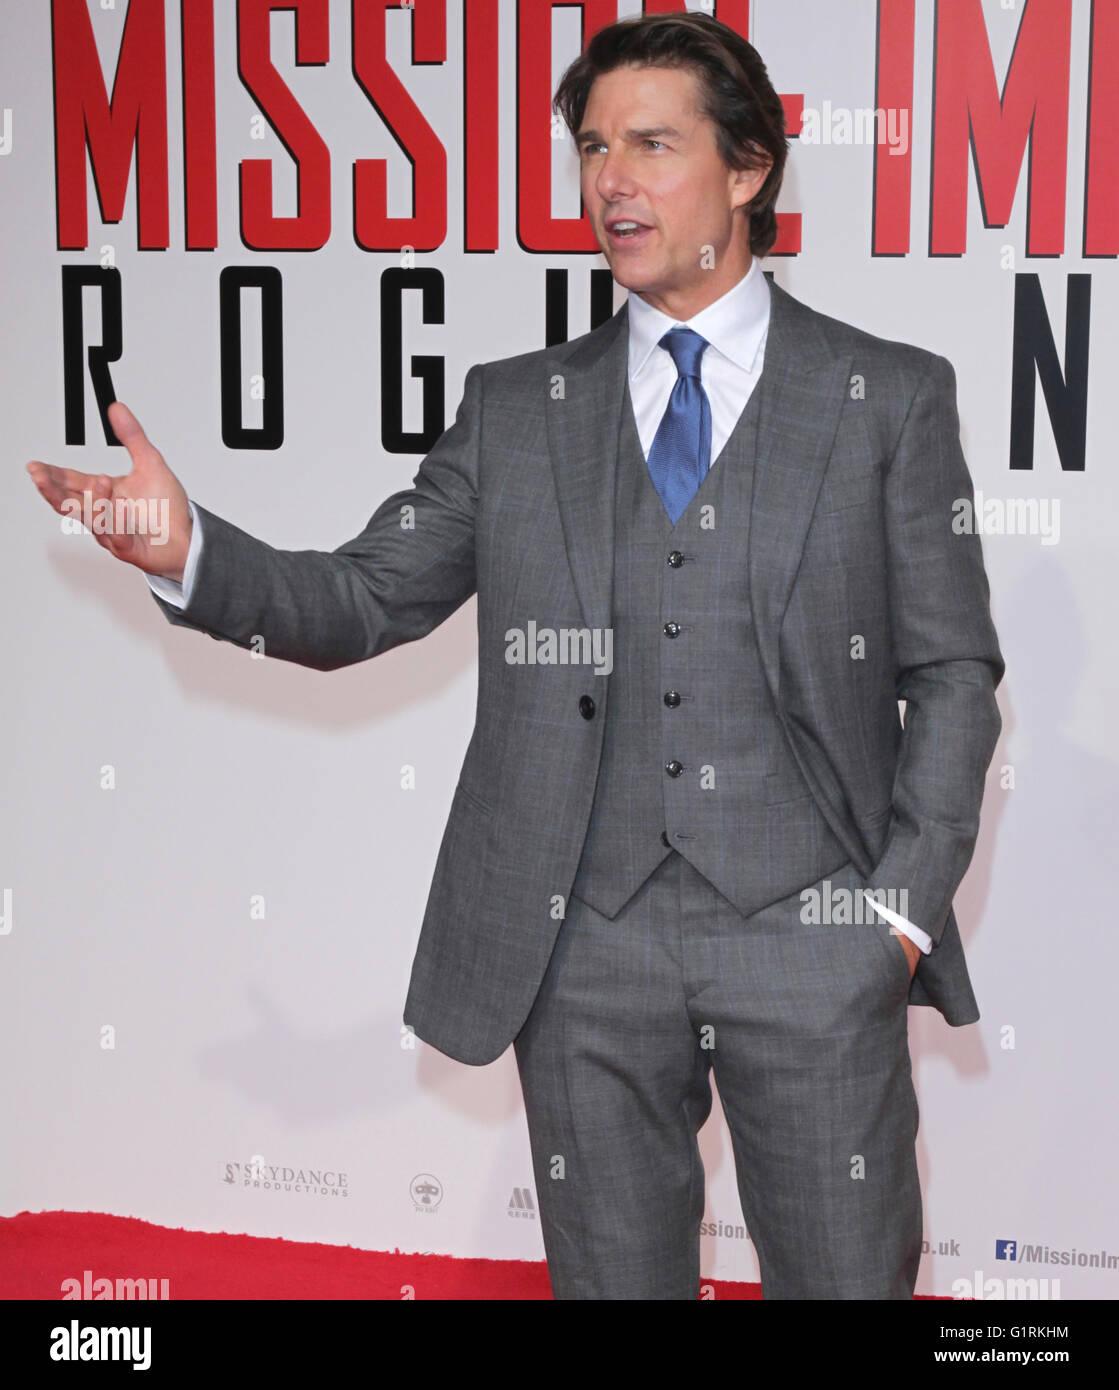 London, UK, 25th July 2015: Tom Cruise attends the Mission Impossible: Rogue Nation - UK special screening at the BFI IMAX in Lo Stock Photo